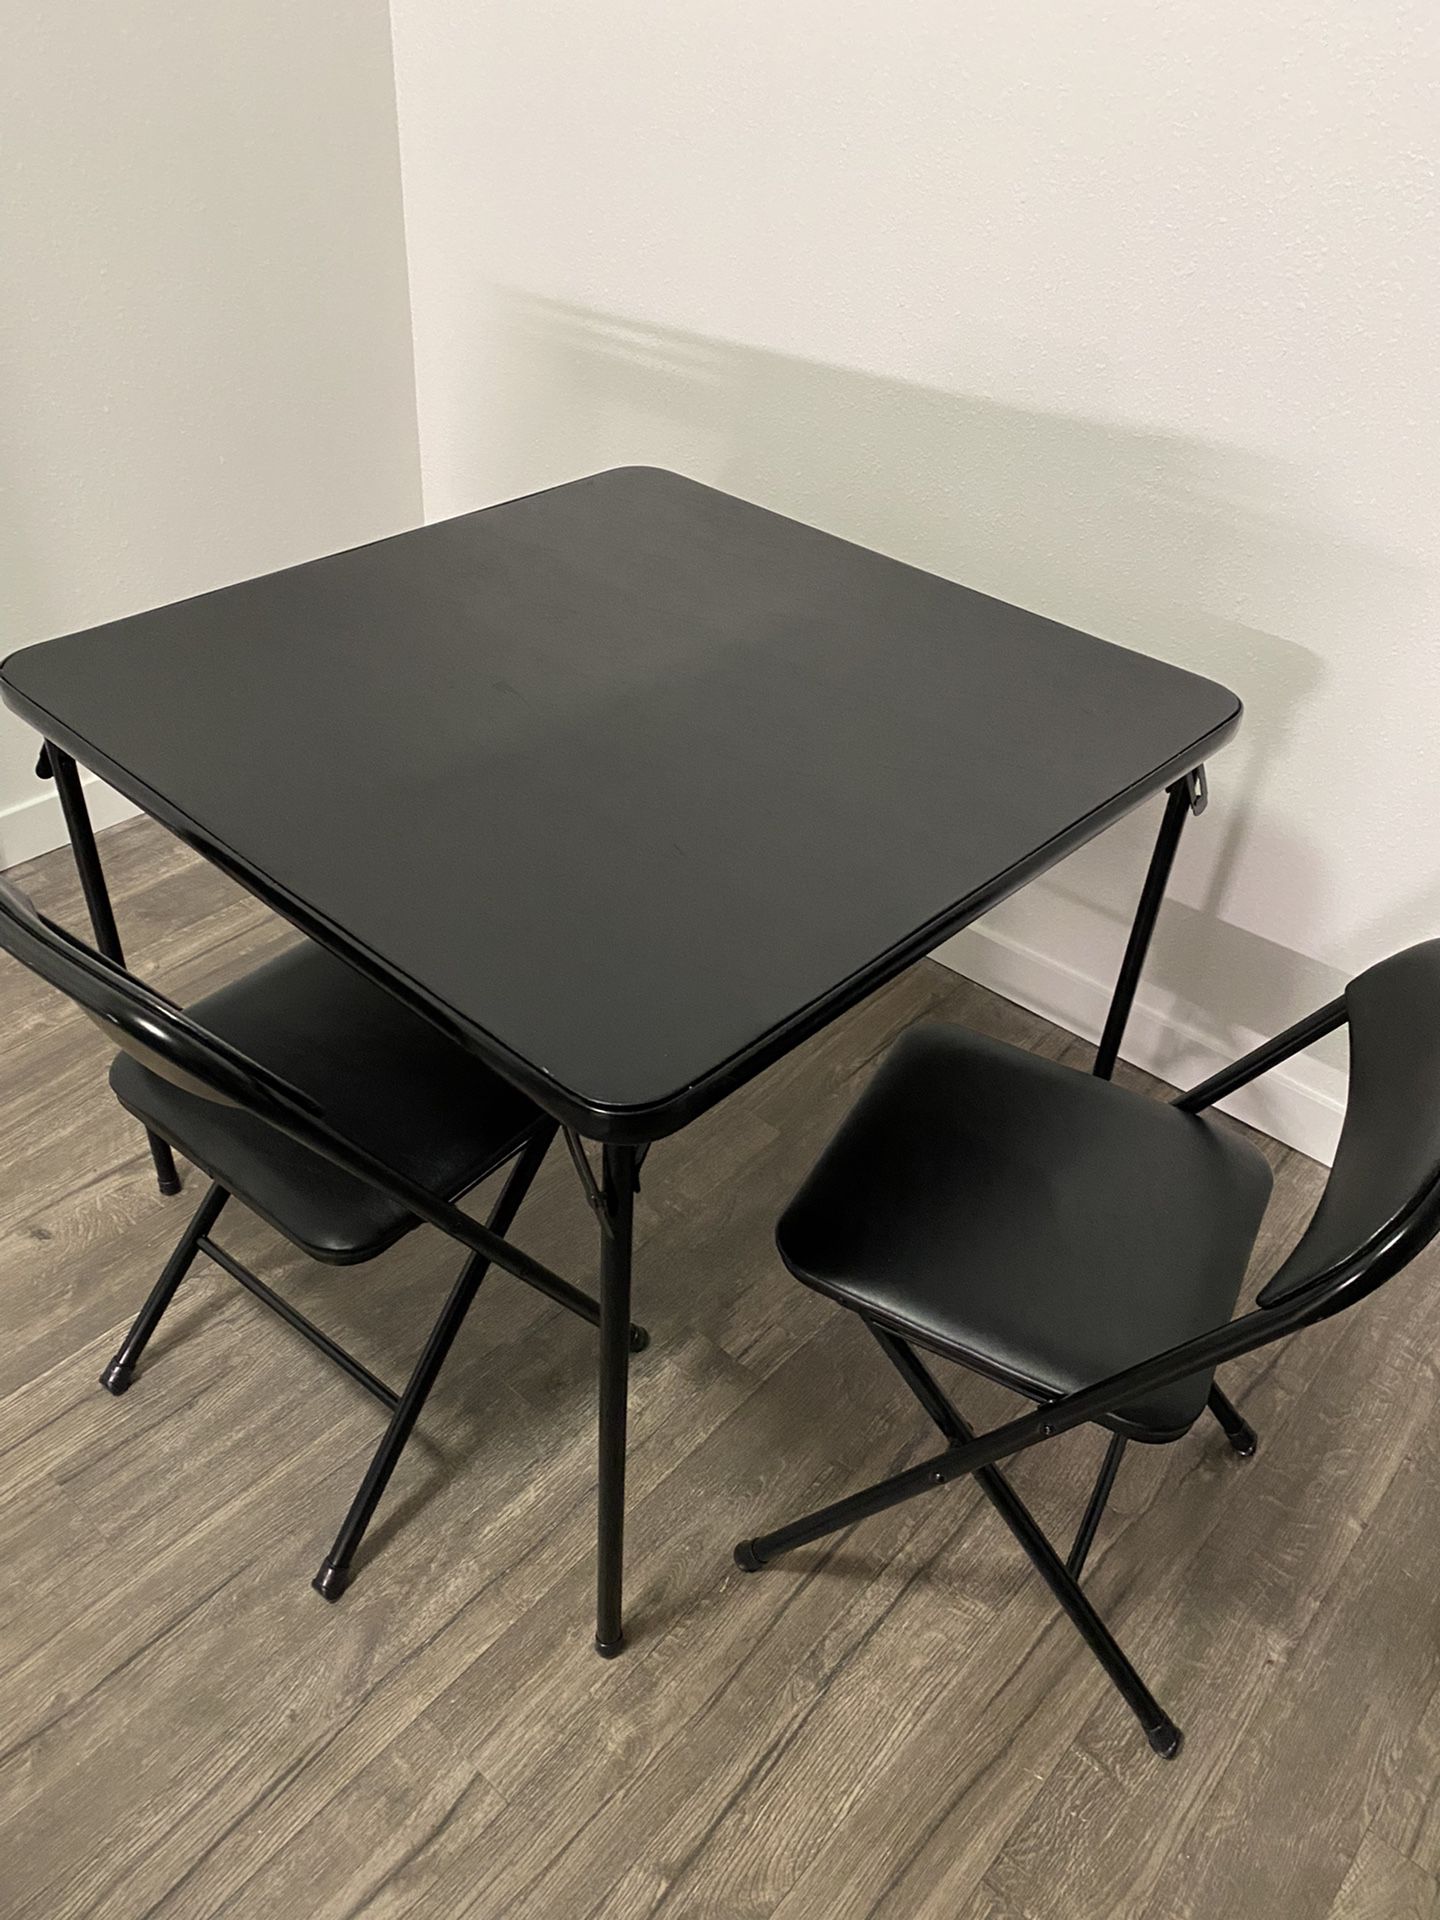 Folding Table With Very Good Condition With 4 Chairs